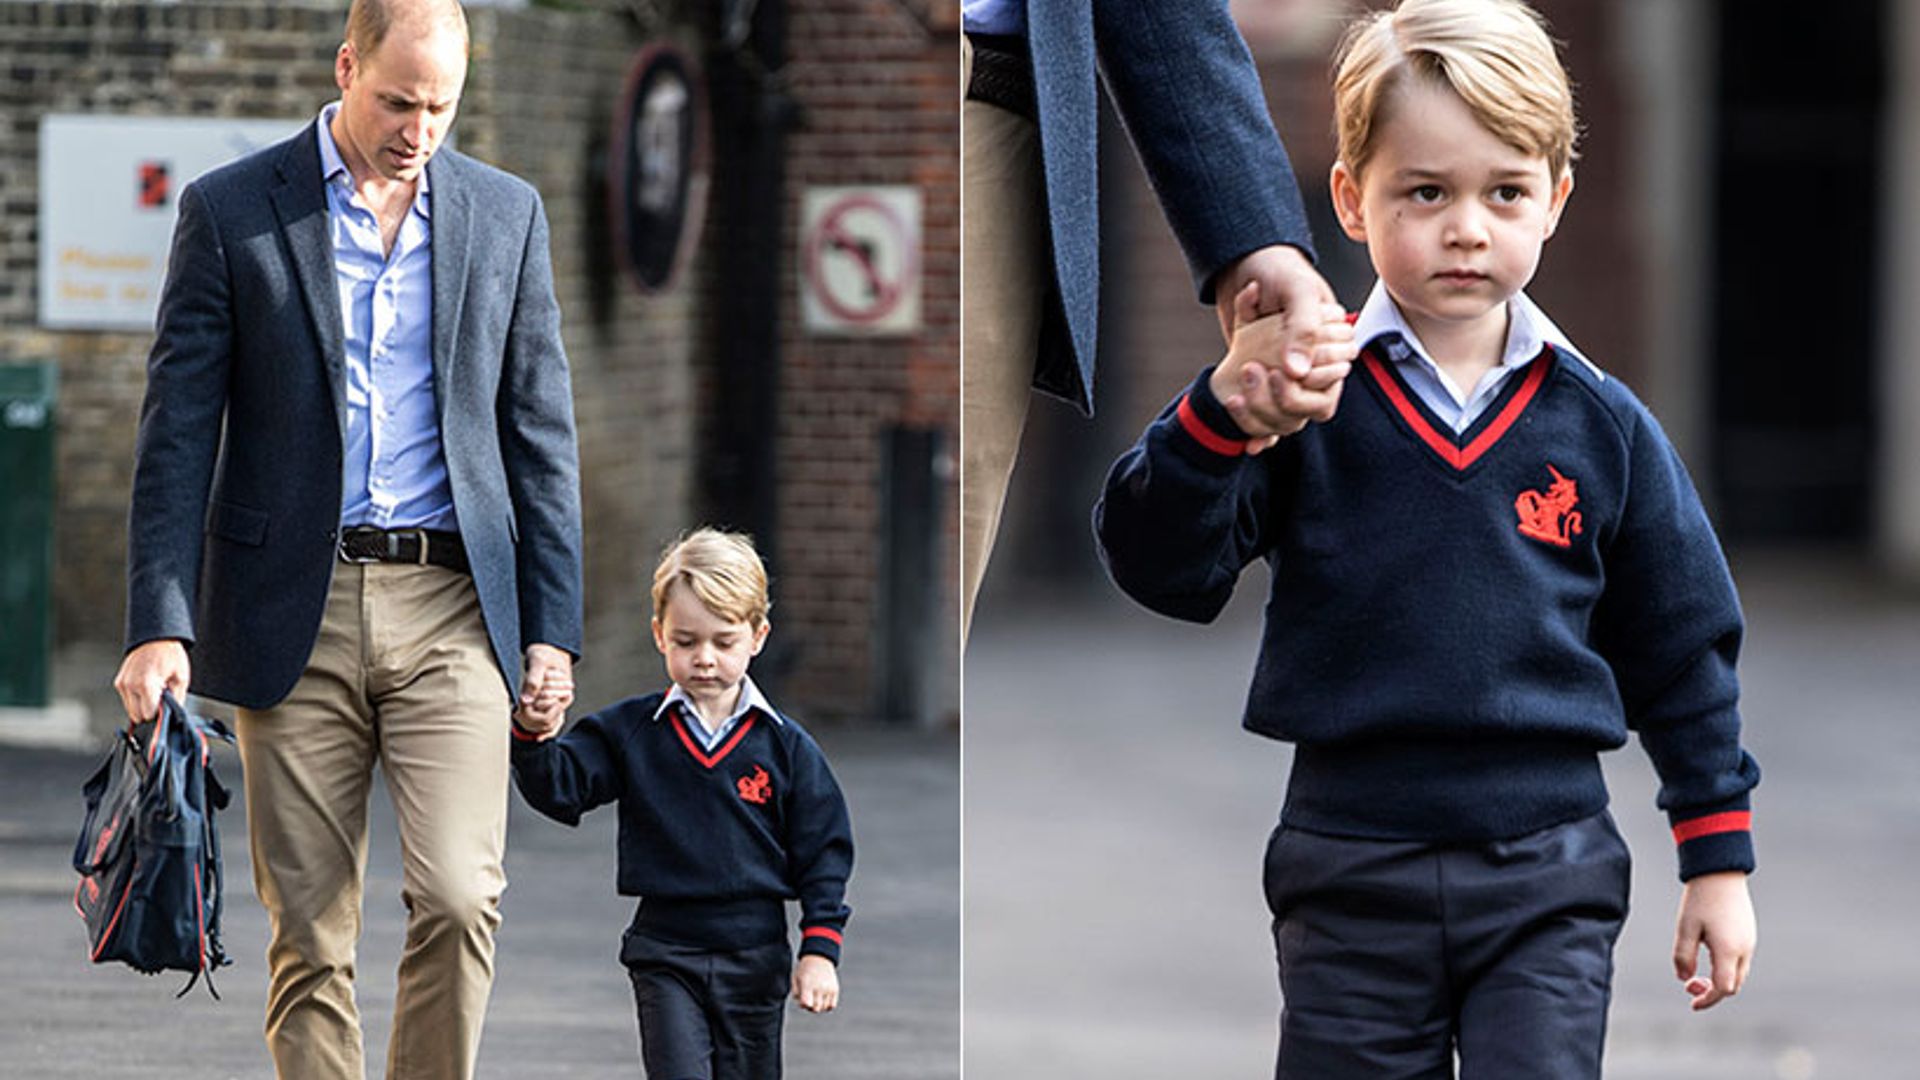 The Duchess of Cambridge misses Prince George's first day at school due to illness